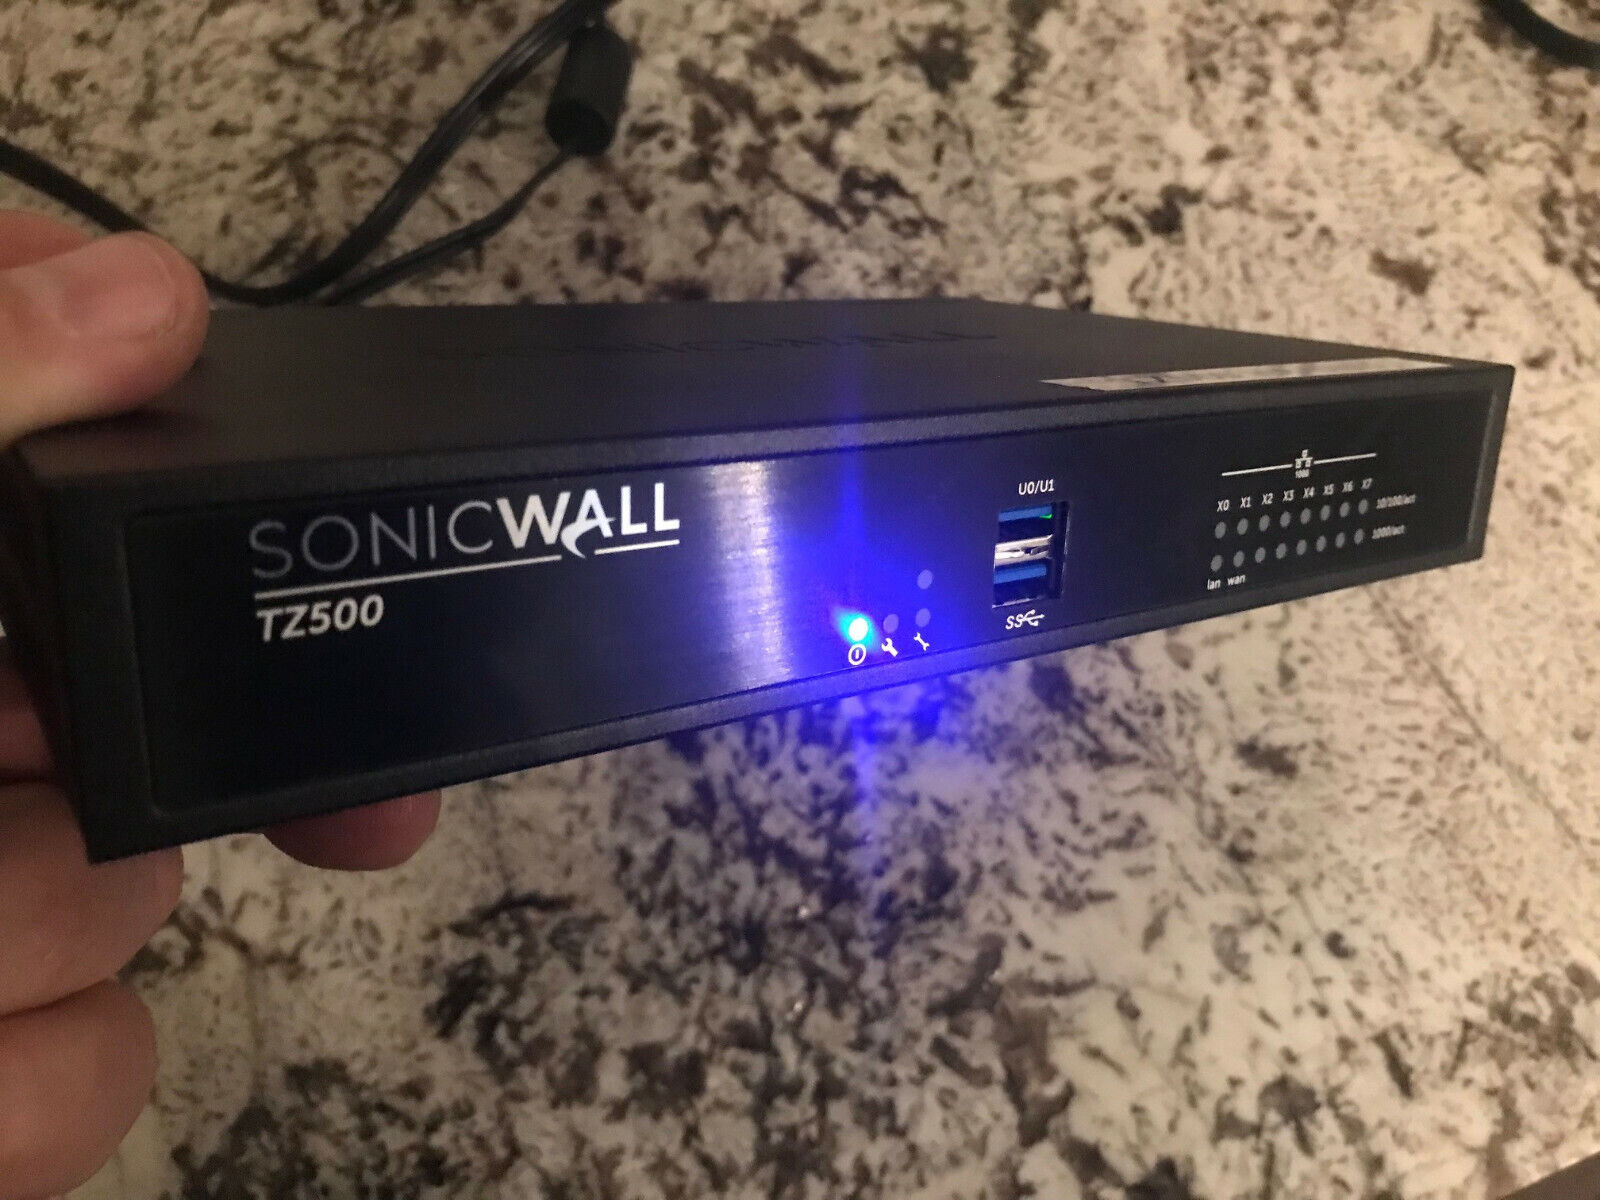 SonicWALL TZ500 High Availability Firewall Network Security Appliance